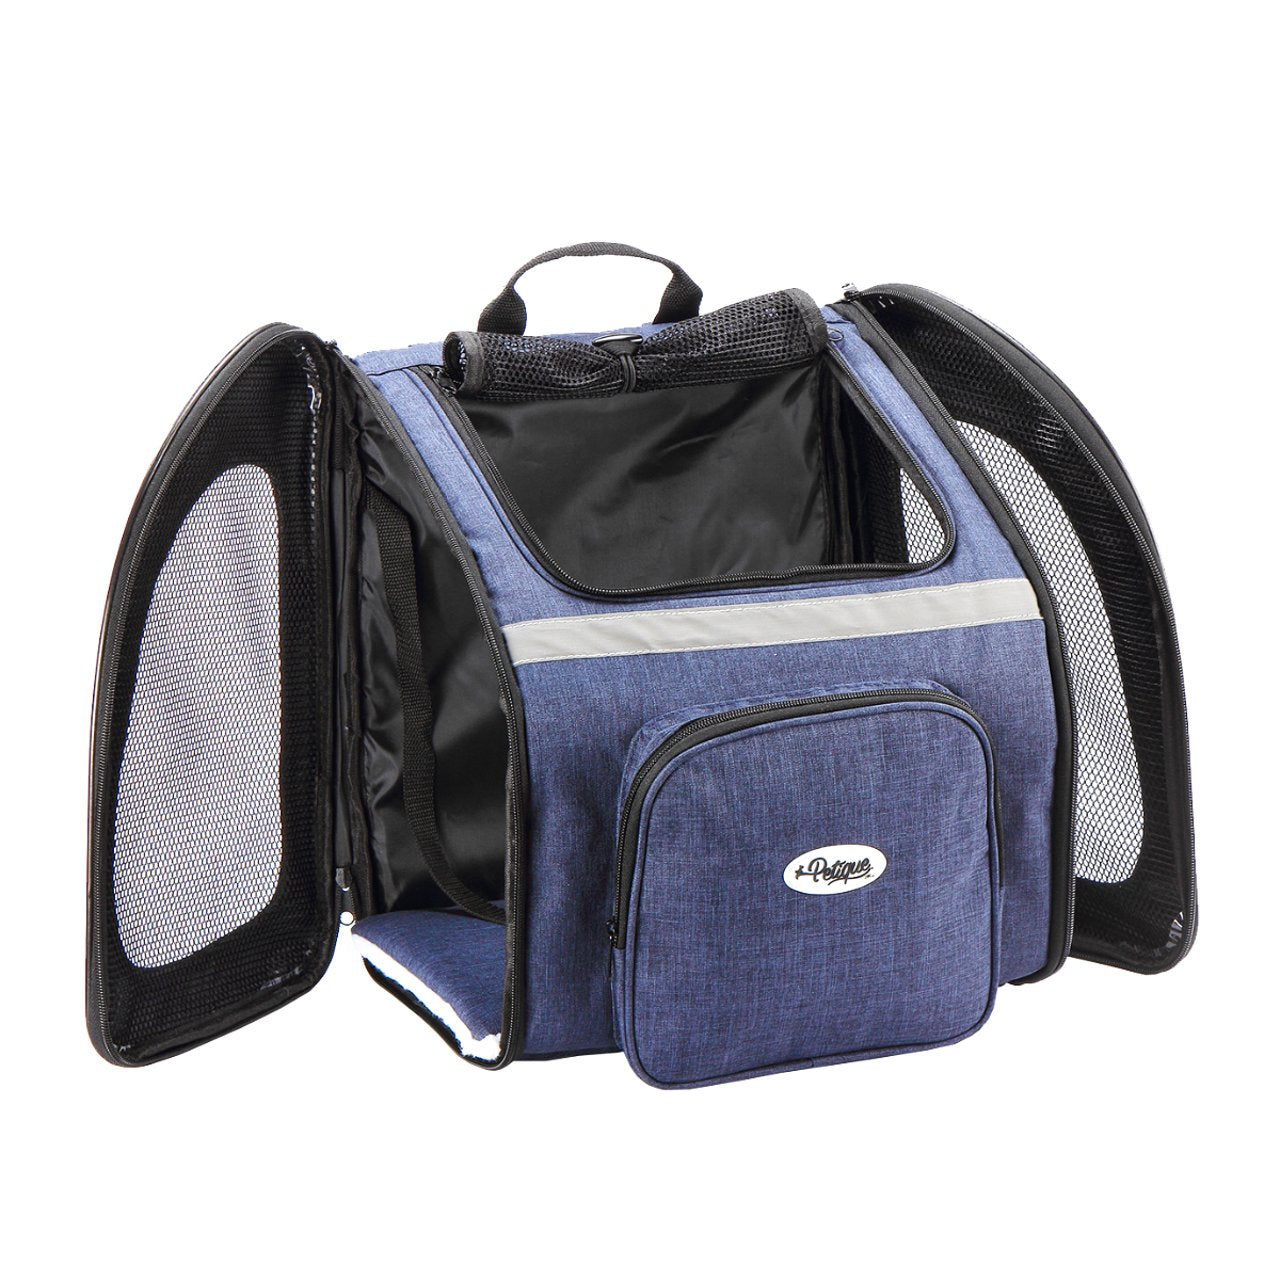 blue pet carrier for dogs and cats